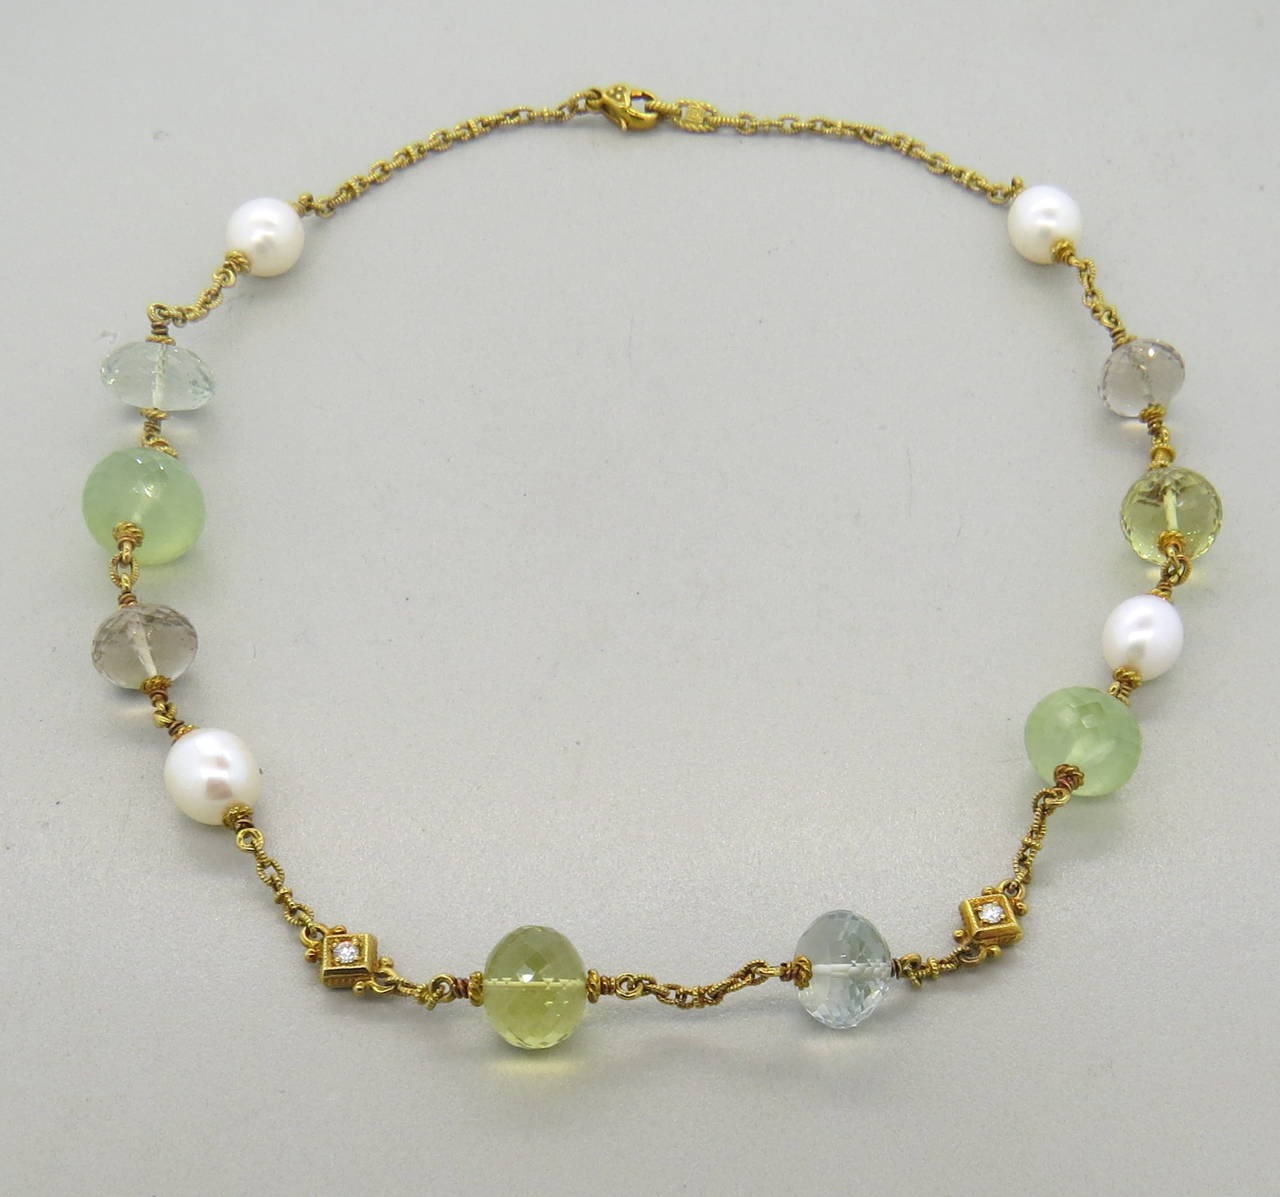 An 18k yellow gold necklace set with pearls 10.4mm x 9.8mm and multicolor quartz stations approximately 13mm in diameter.  Crafted by Judith Ripka, the necklace measures 18